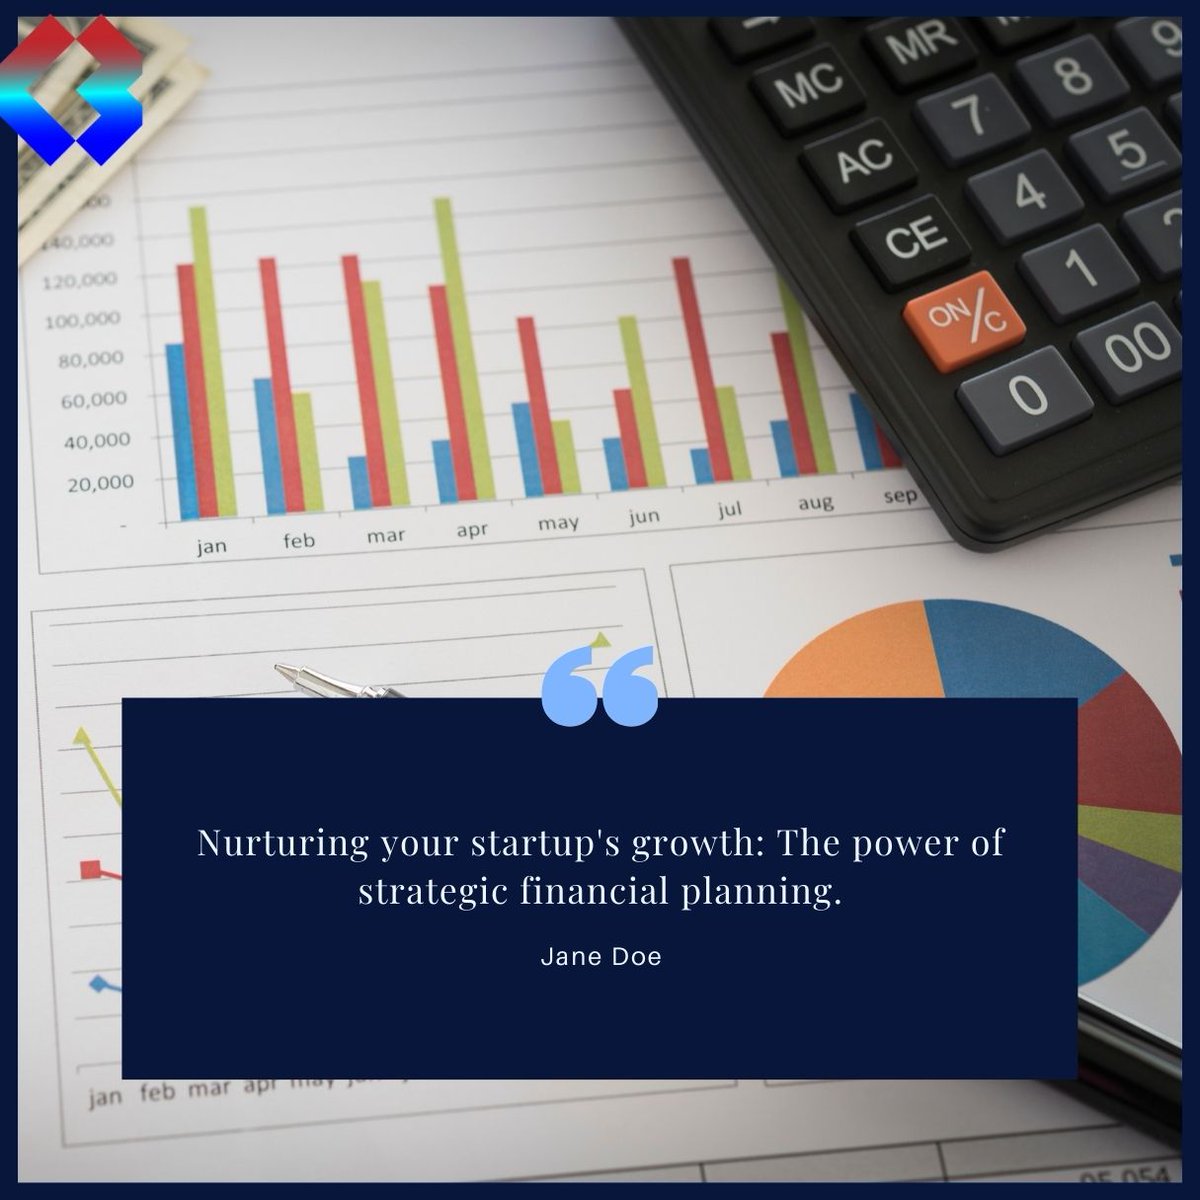 Ensure your startup thrives beyond five years! 🌱 Invest in strategic financial planning to navigate tax and growth with ease. Learn more: rfr.bz/tl8hzhi #GrowYourBusiness #StrategicPlanning #LaserBeam  rfr.bz/tl8hzhh